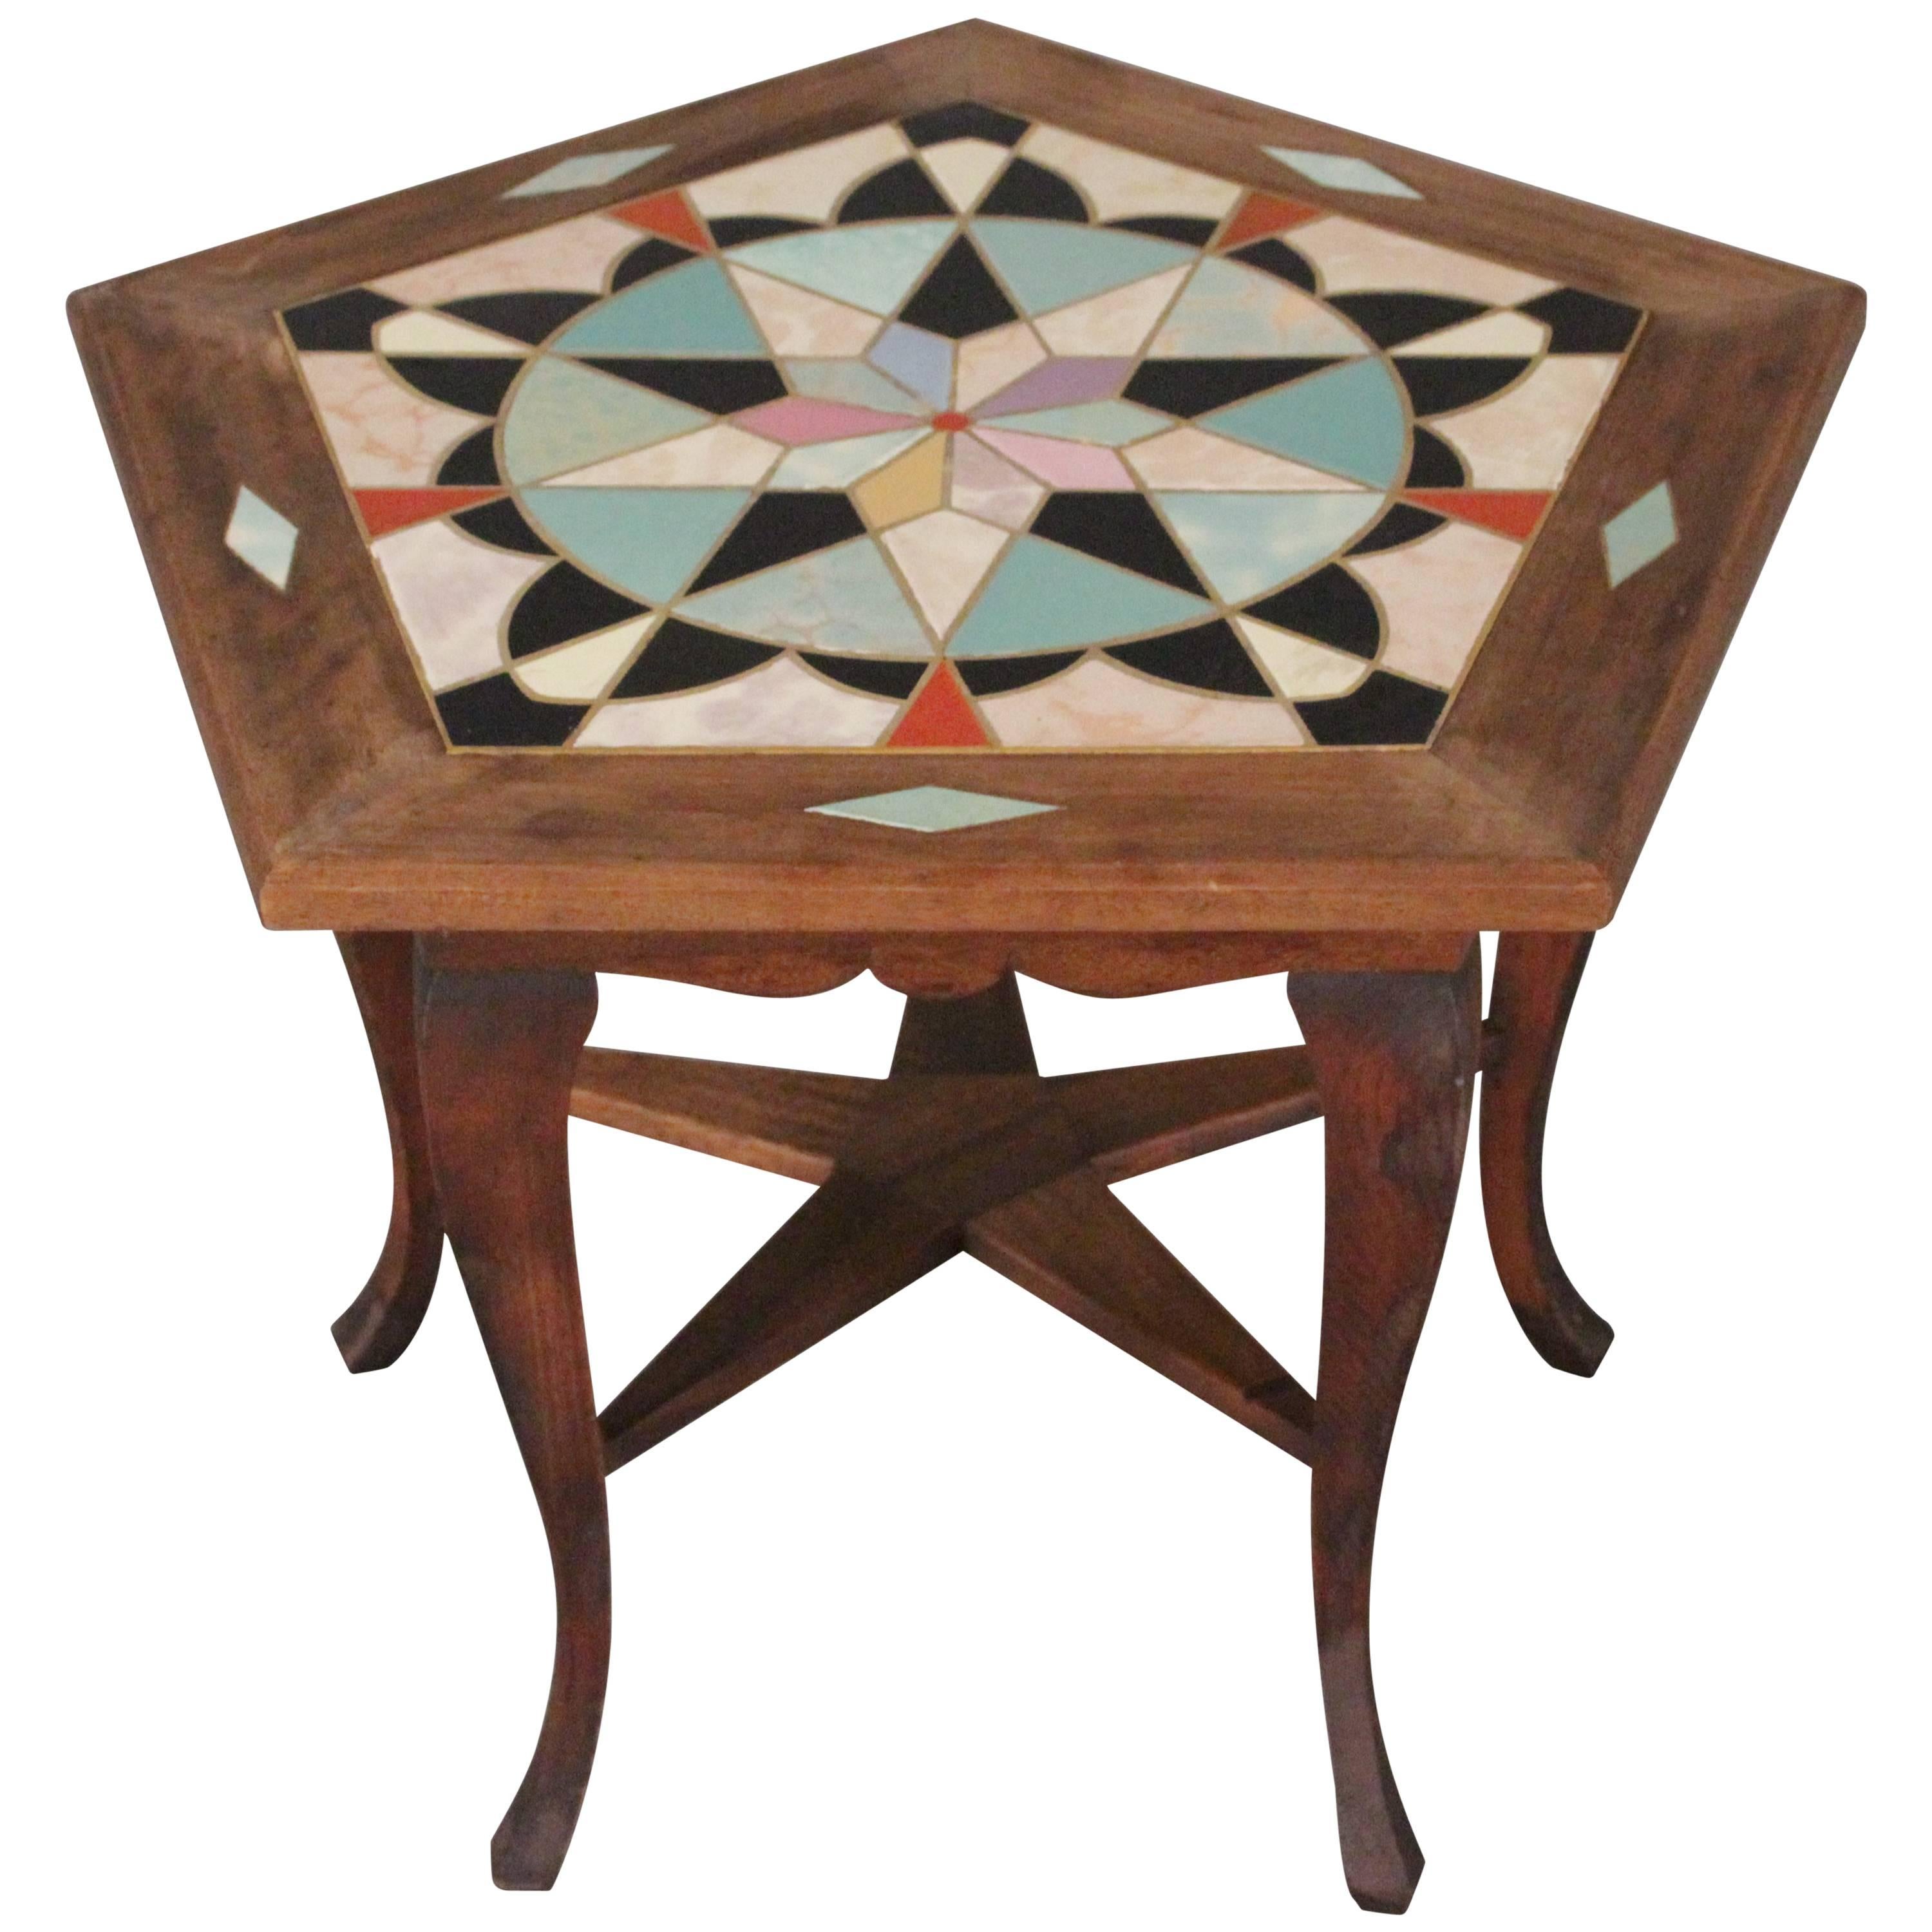 Spanish Revival California Tile Table with Star Motif